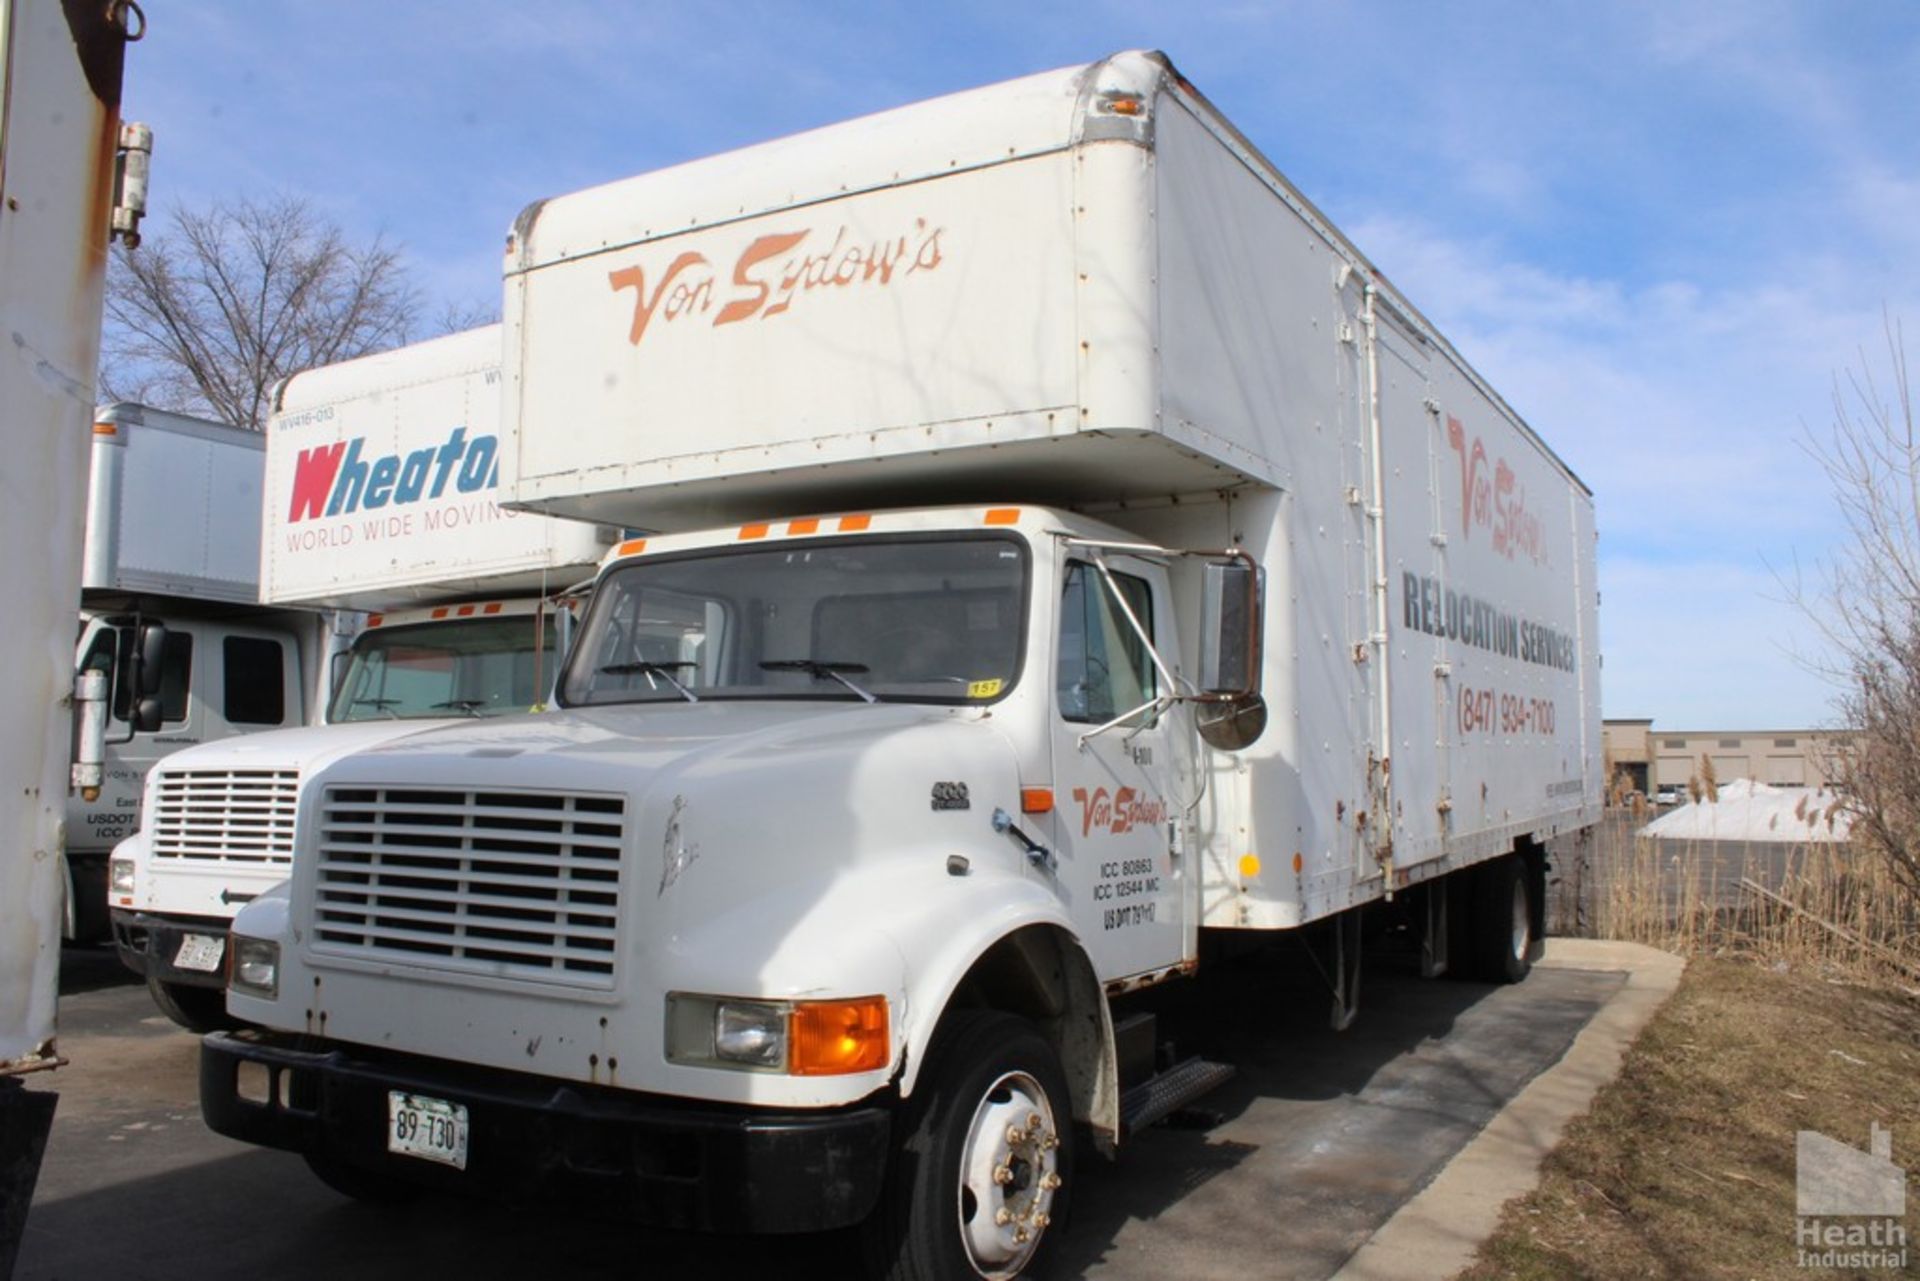 1998 INTERNATIONAL 4700 28FT MOVERS TRUCK, 7.6L L6 DIESEL ENGINE, 162,324 MILES SHOWN ON ODOMETER,